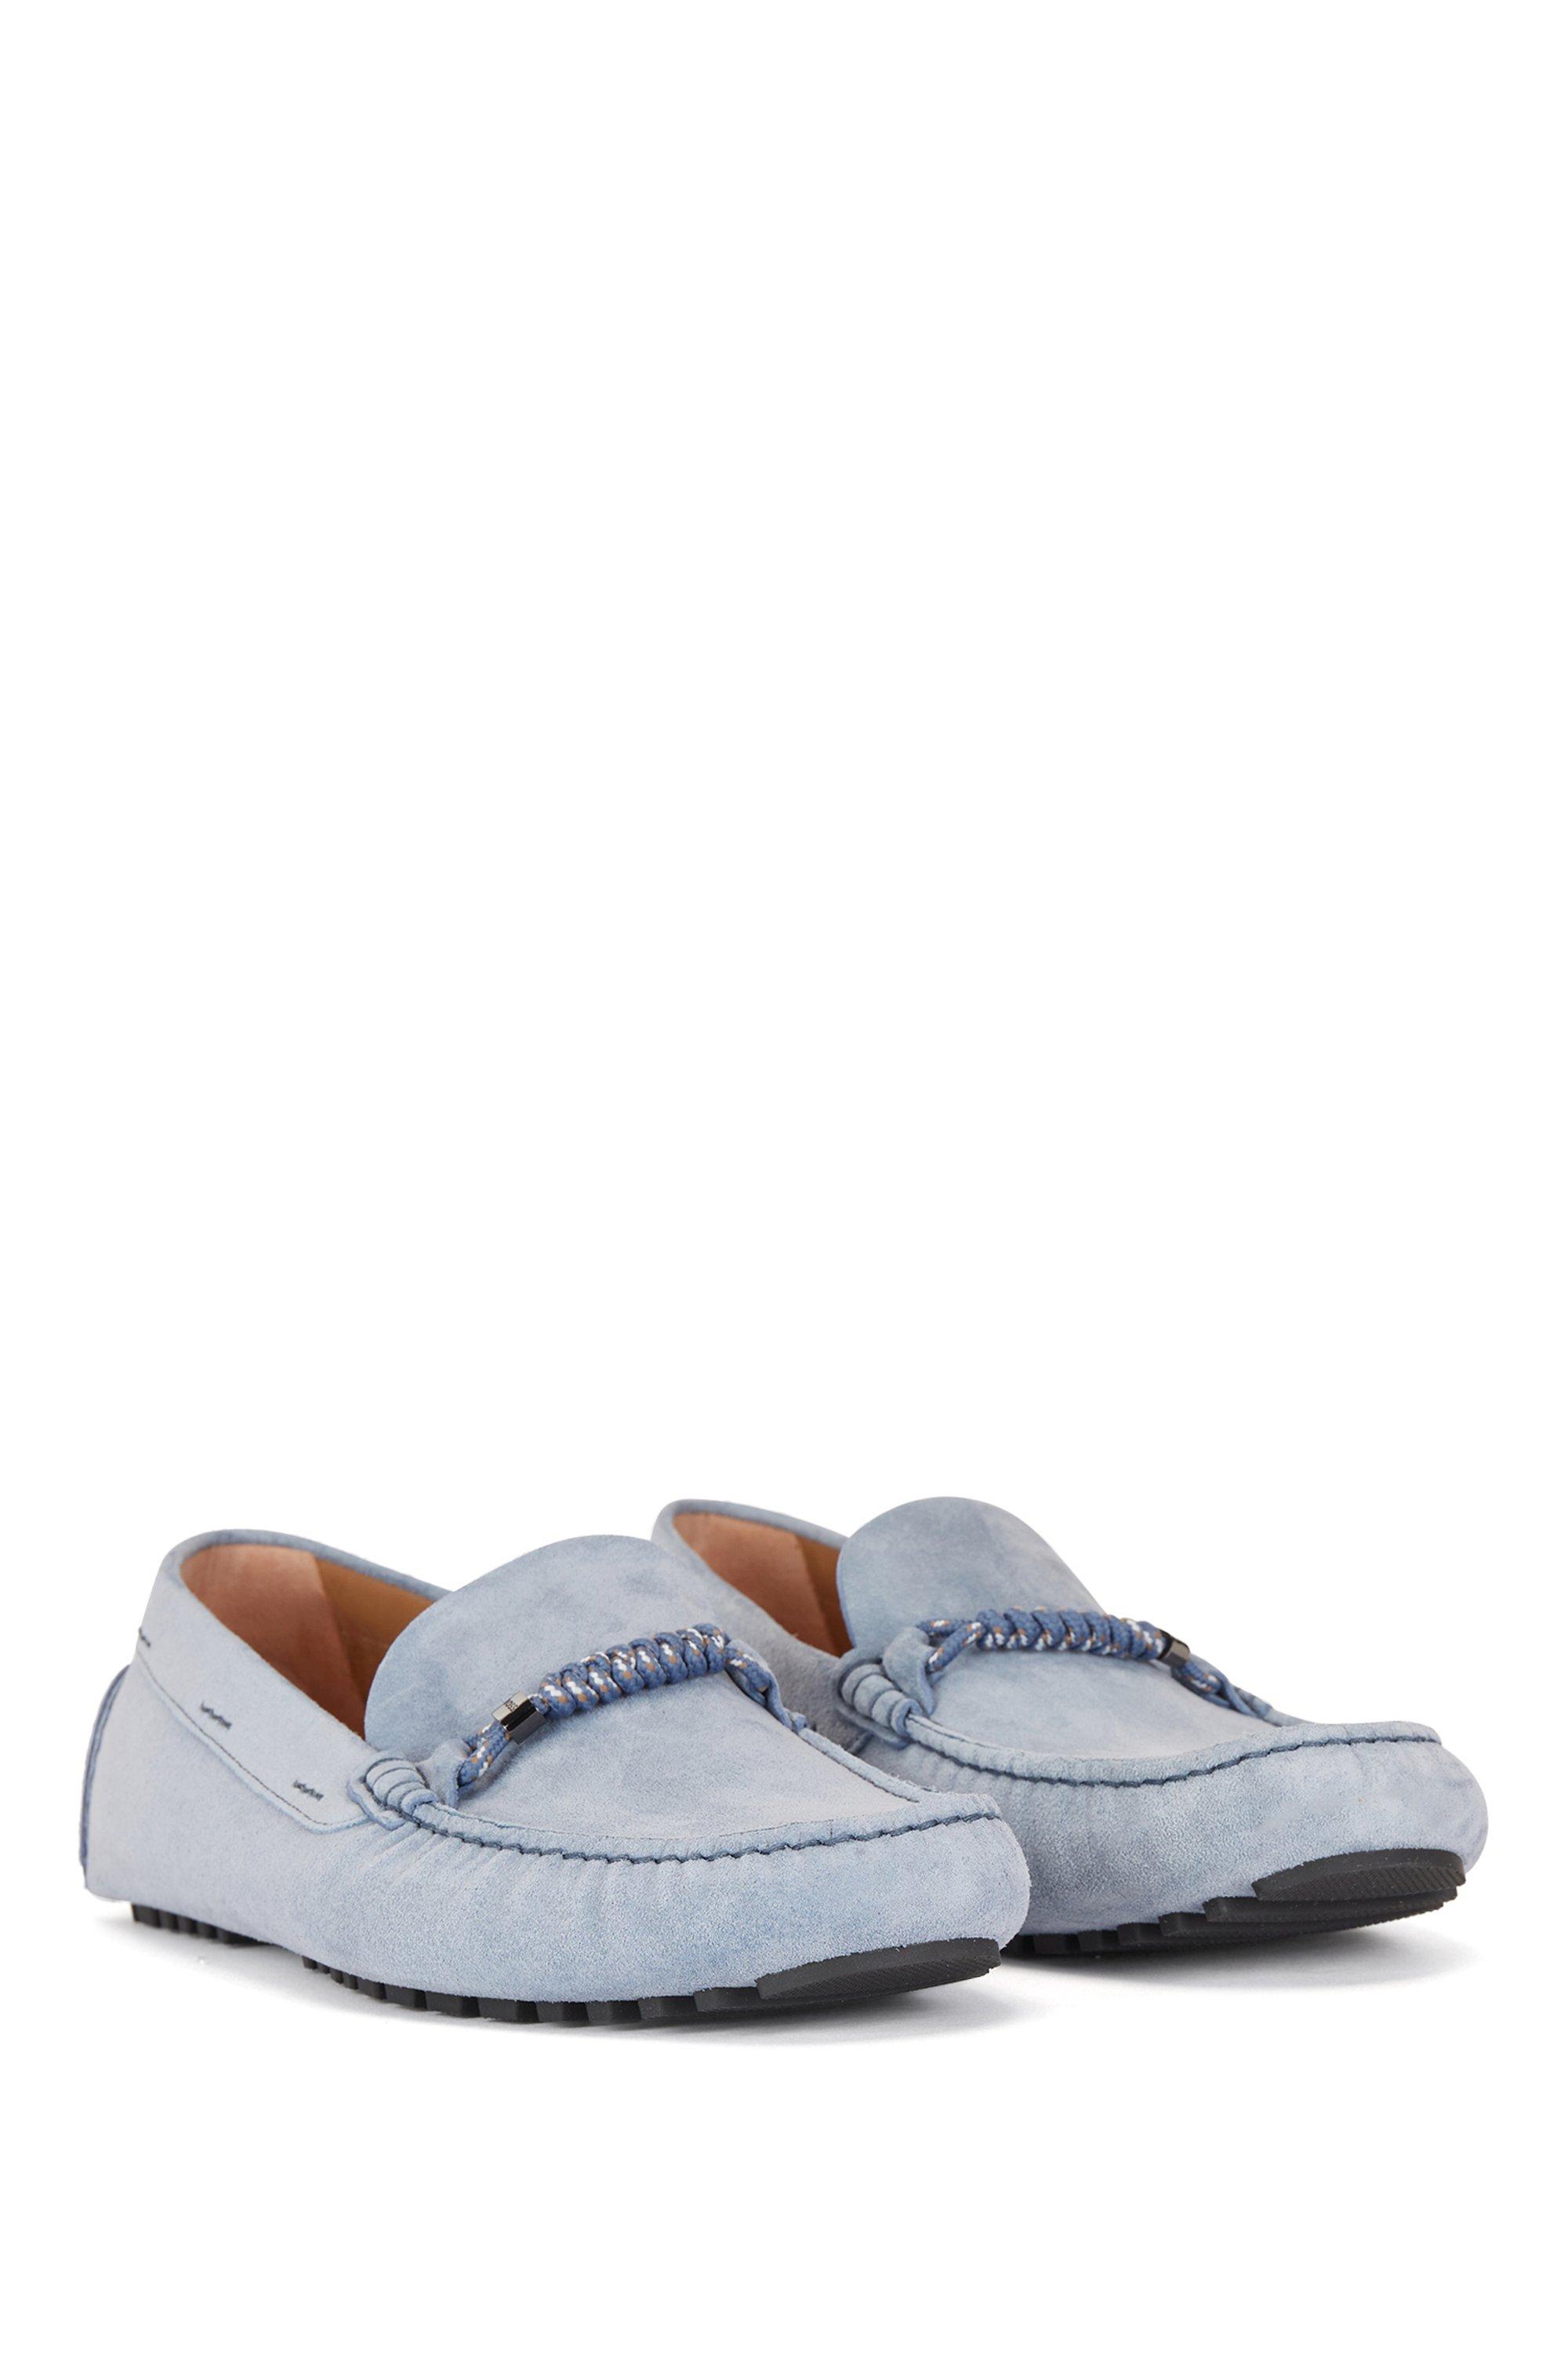 BOSS by HUGO BOSS Suede Slip-on Moccasins With Branded Cord Trim in Blue  for Men | Lyst